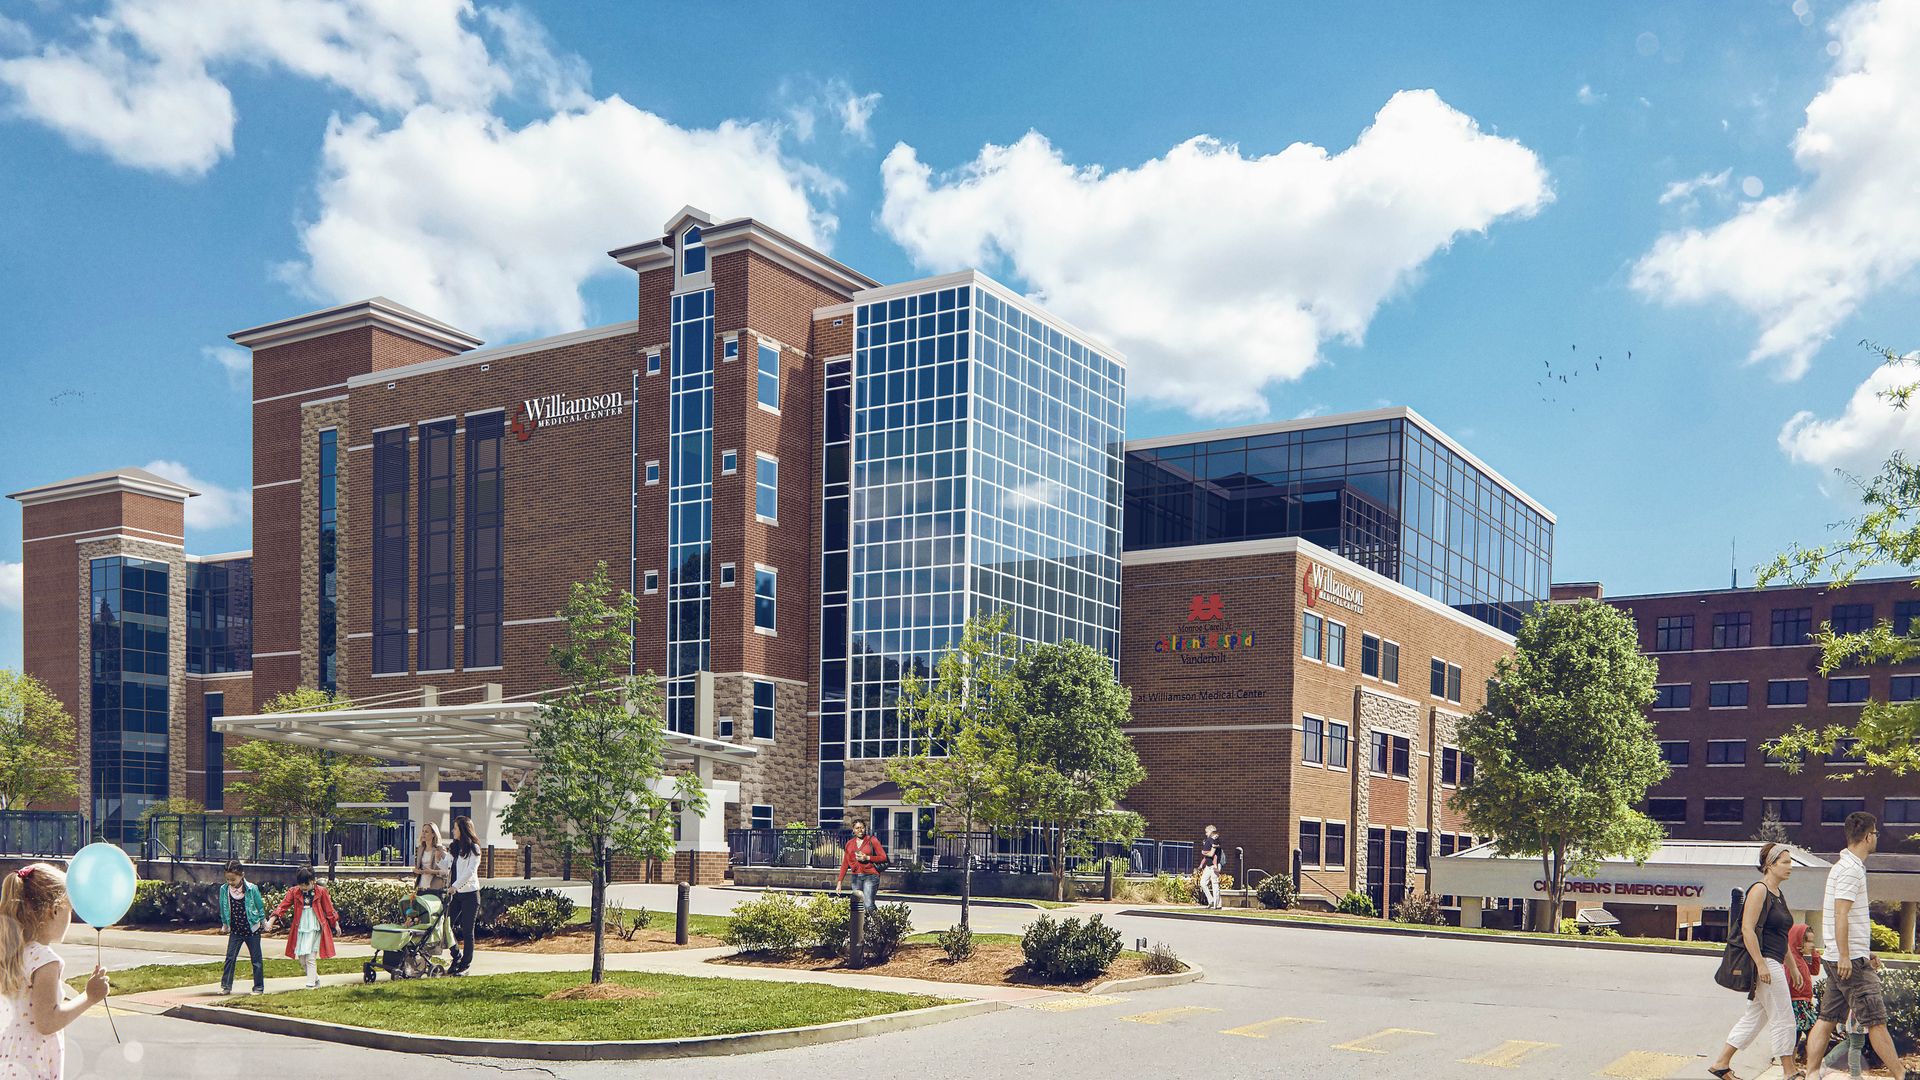 A rendering shows planned improvements to Williamson Medical Center. The red brick building is bookended by two taller towers.